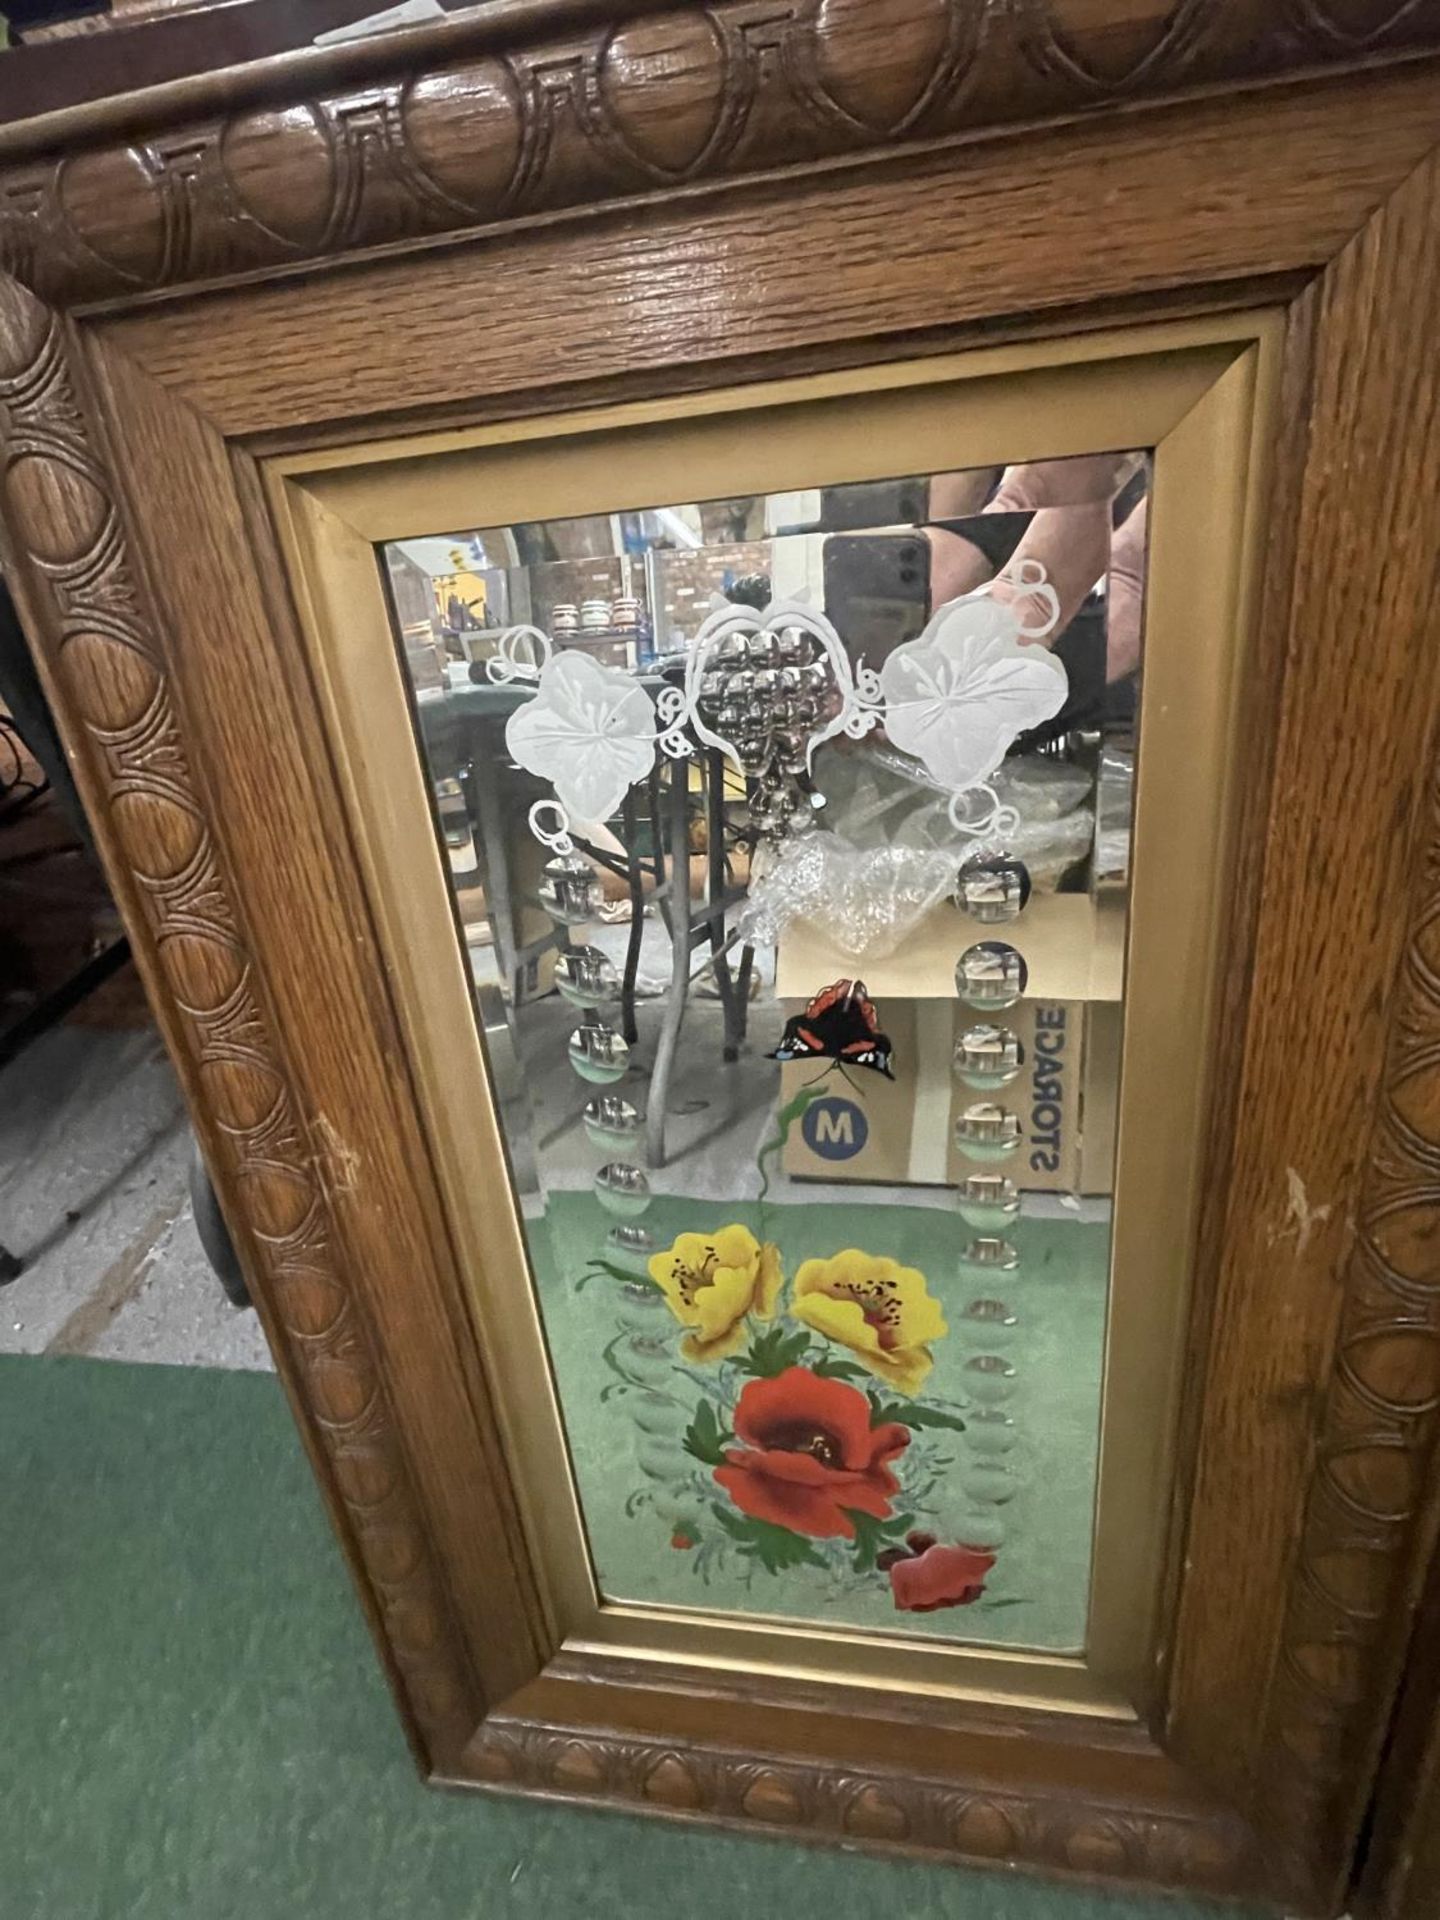 TWO OAK FRAMED DECORATIVE MIRRORS WITH FLOWERS AND BUTTERFLIES 20" X 33" - Image 5 of 6